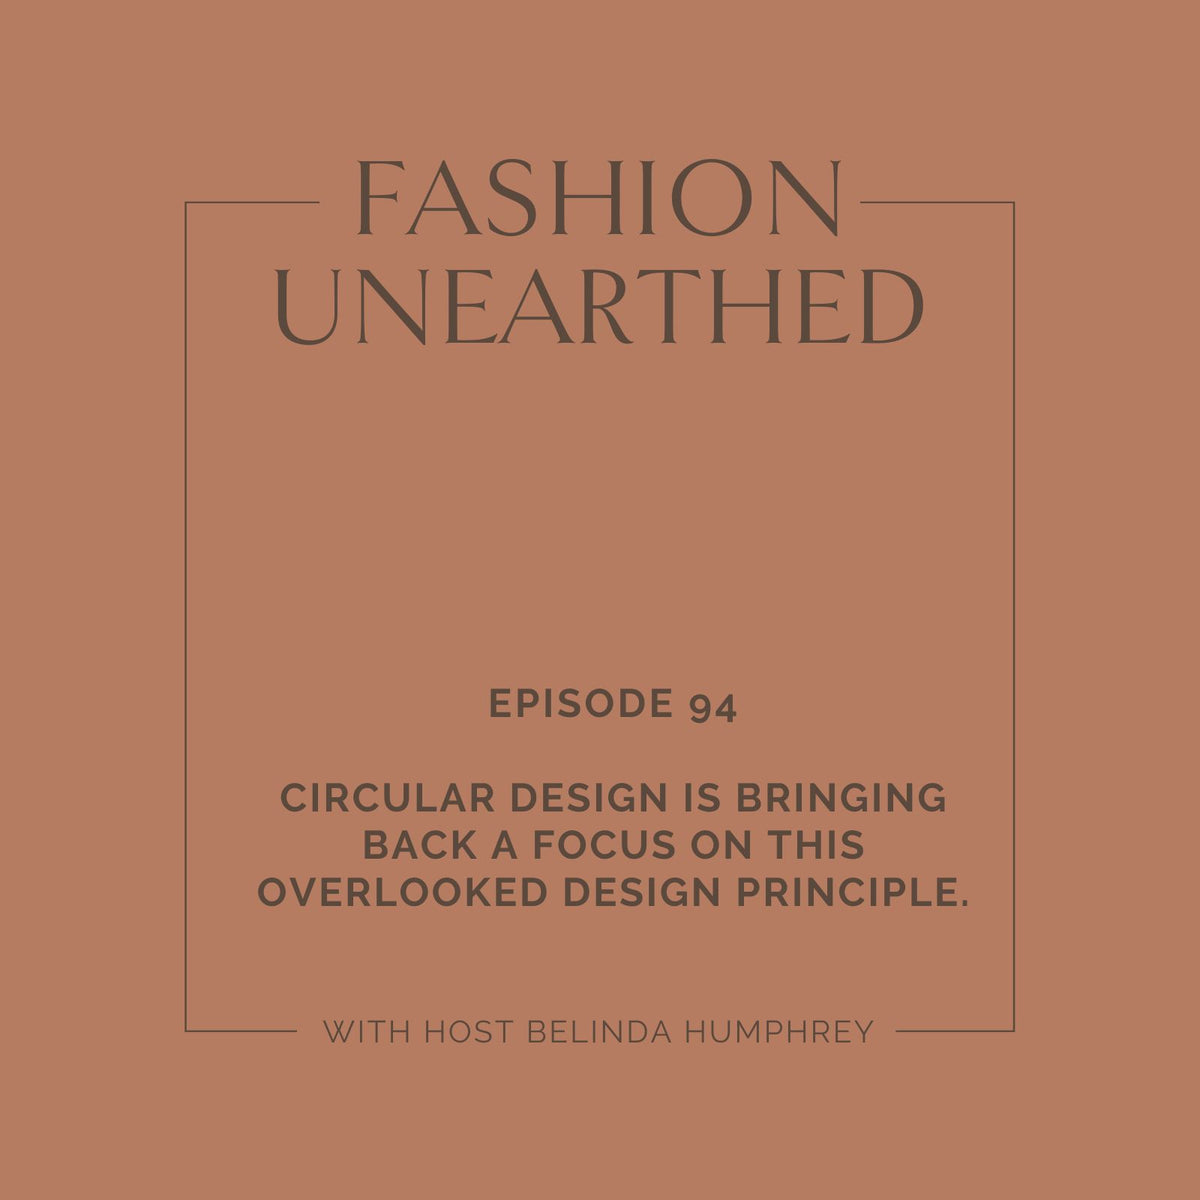 Episode 94: Circular design is bringing back a focus on this overlooked design principle